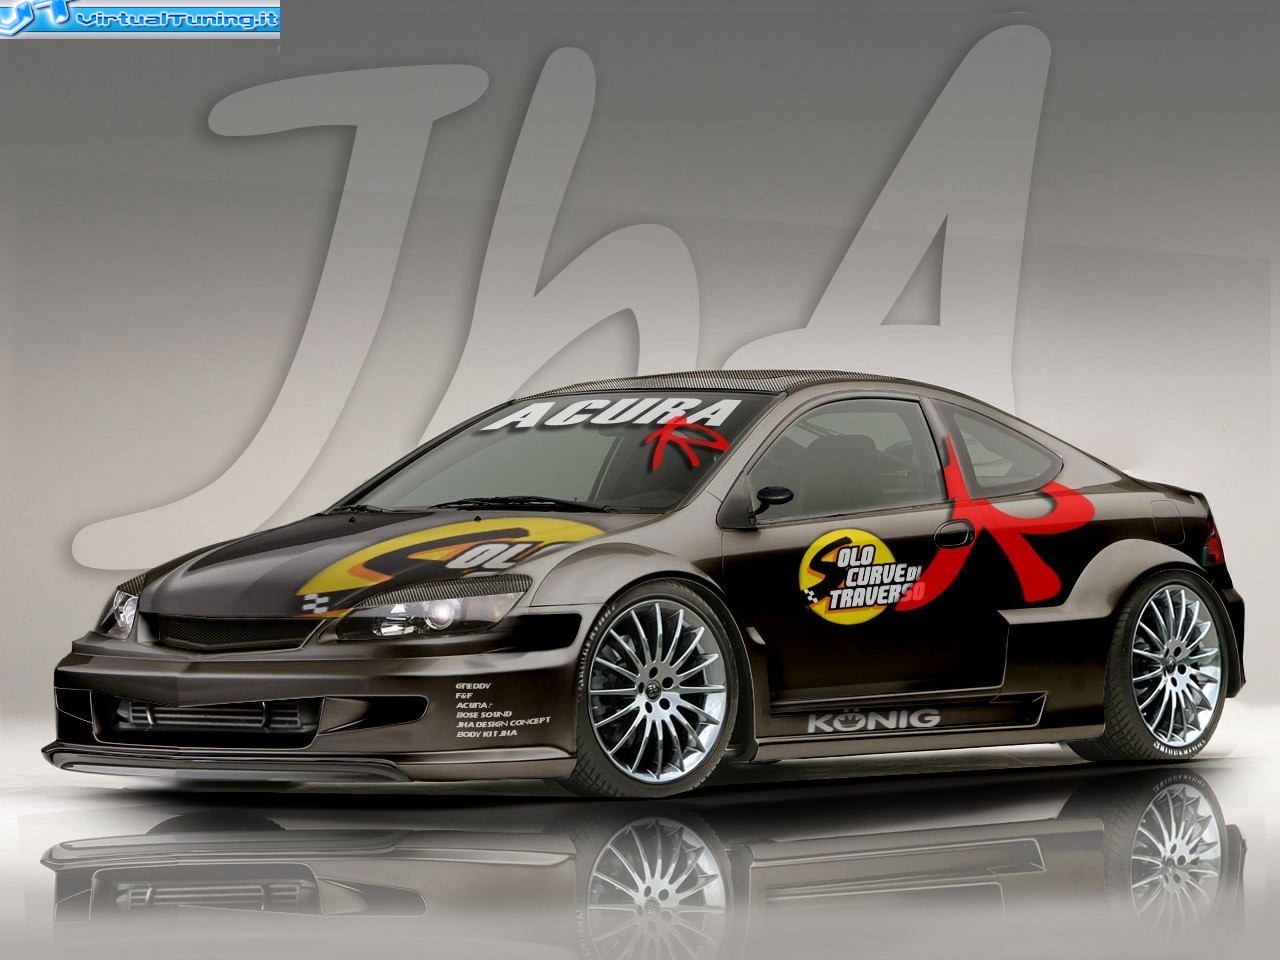 VirtualTuning ACURA RSX by jha